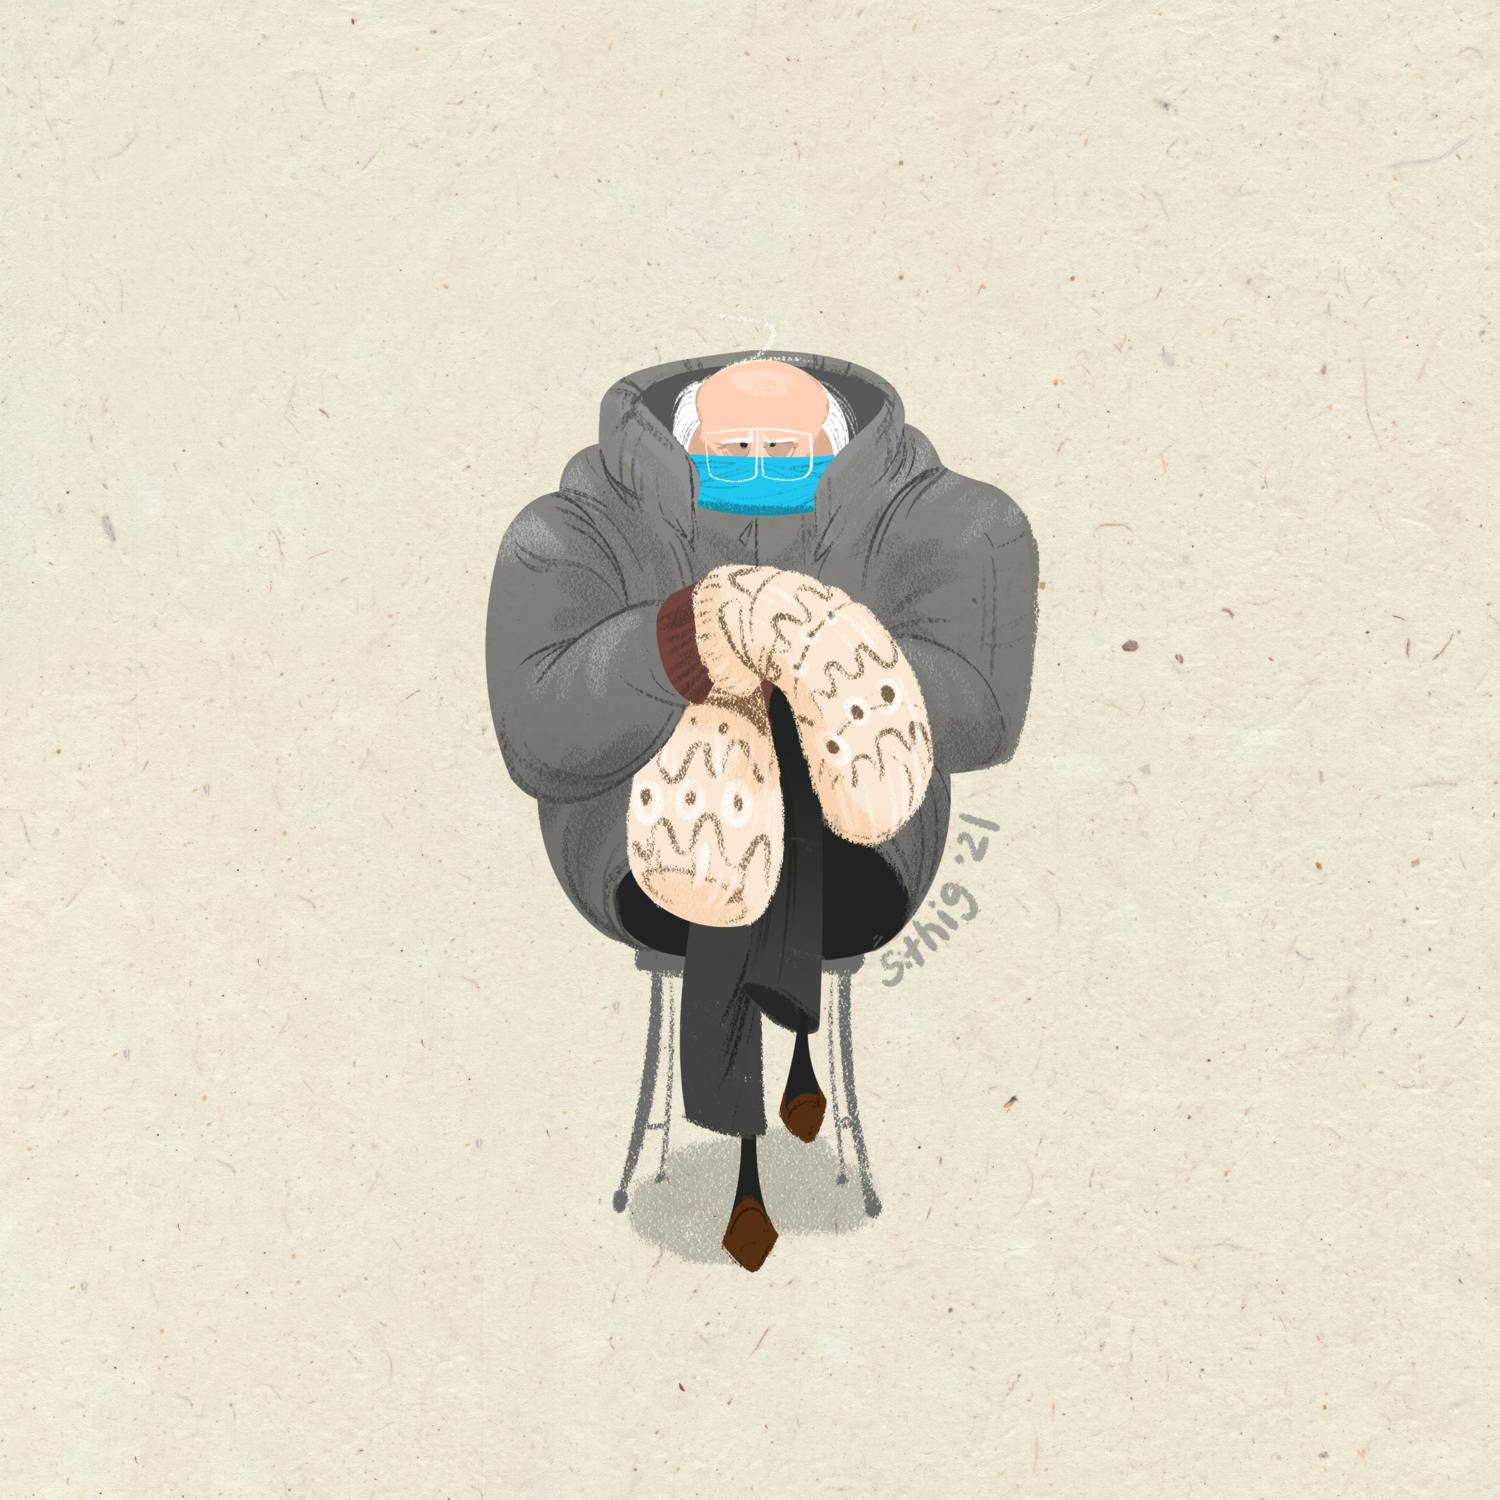 An illustration of Bernie Sanders sitting with his enormous mittens